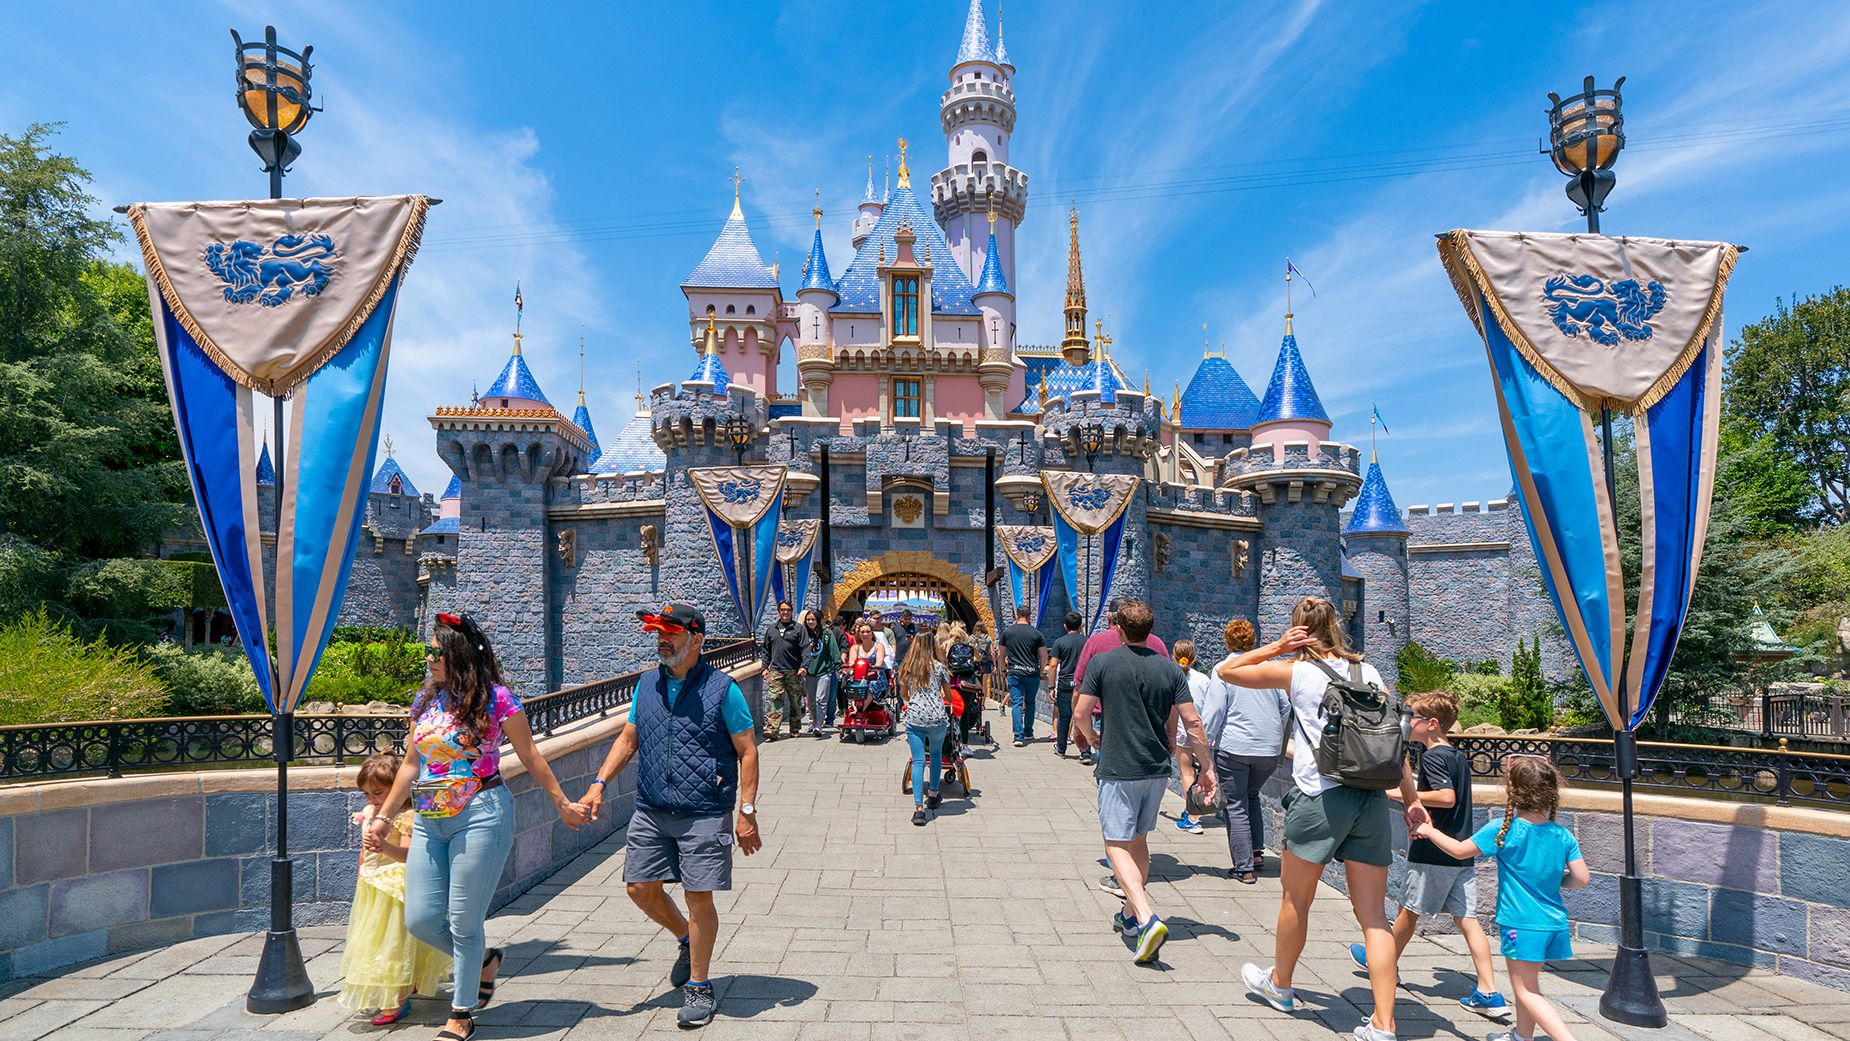 Sleeping Beauty Castle is the iconic image of Disneyland -- and a chance to see it with your own eyes just got more expensive.